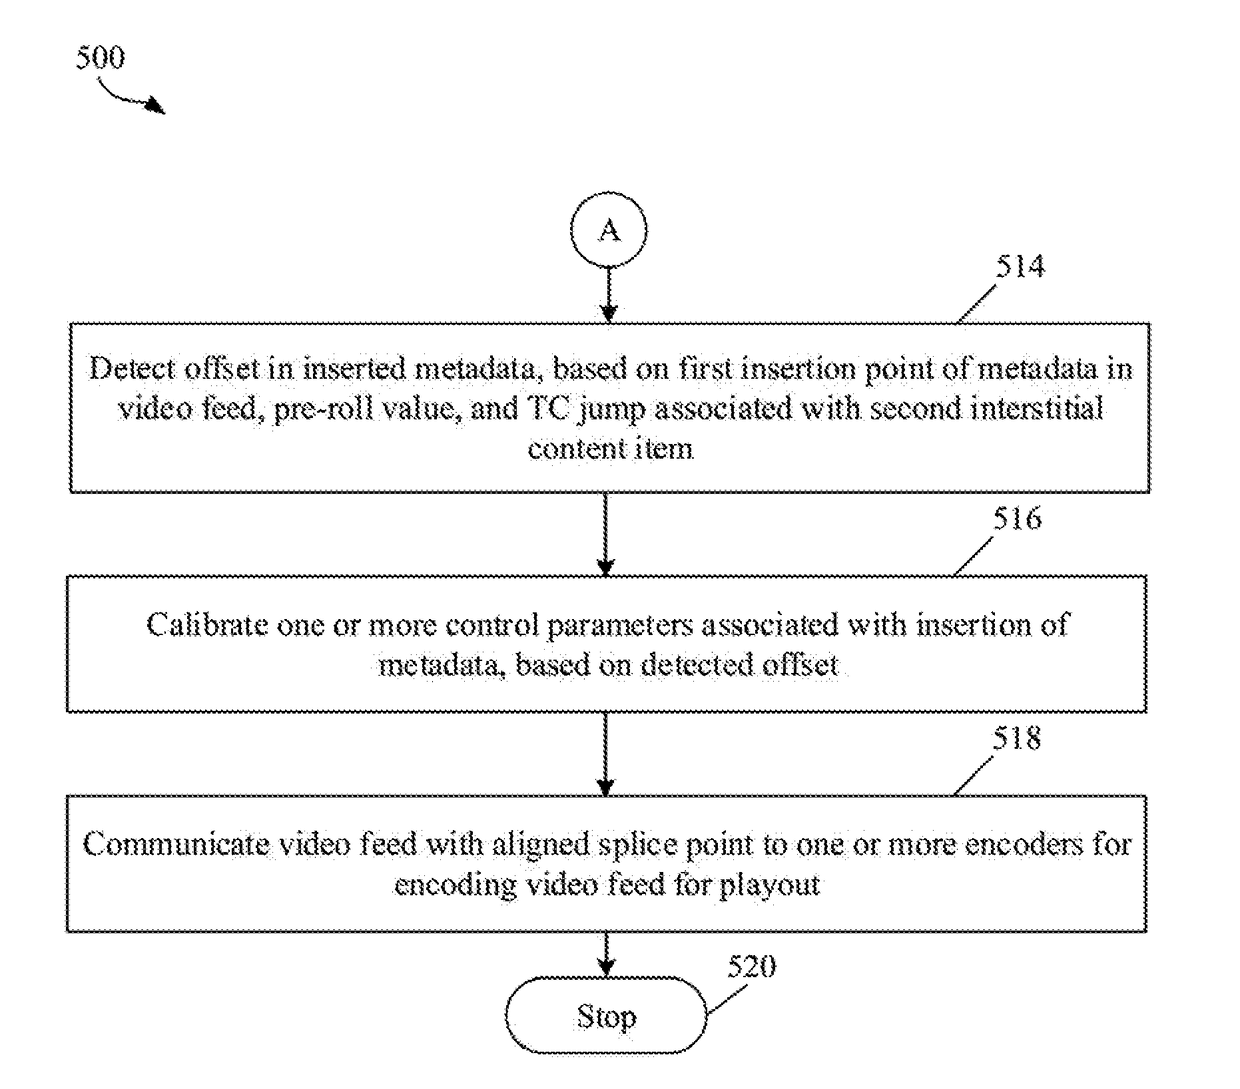 Validating and calibrating splice points in interstitial content